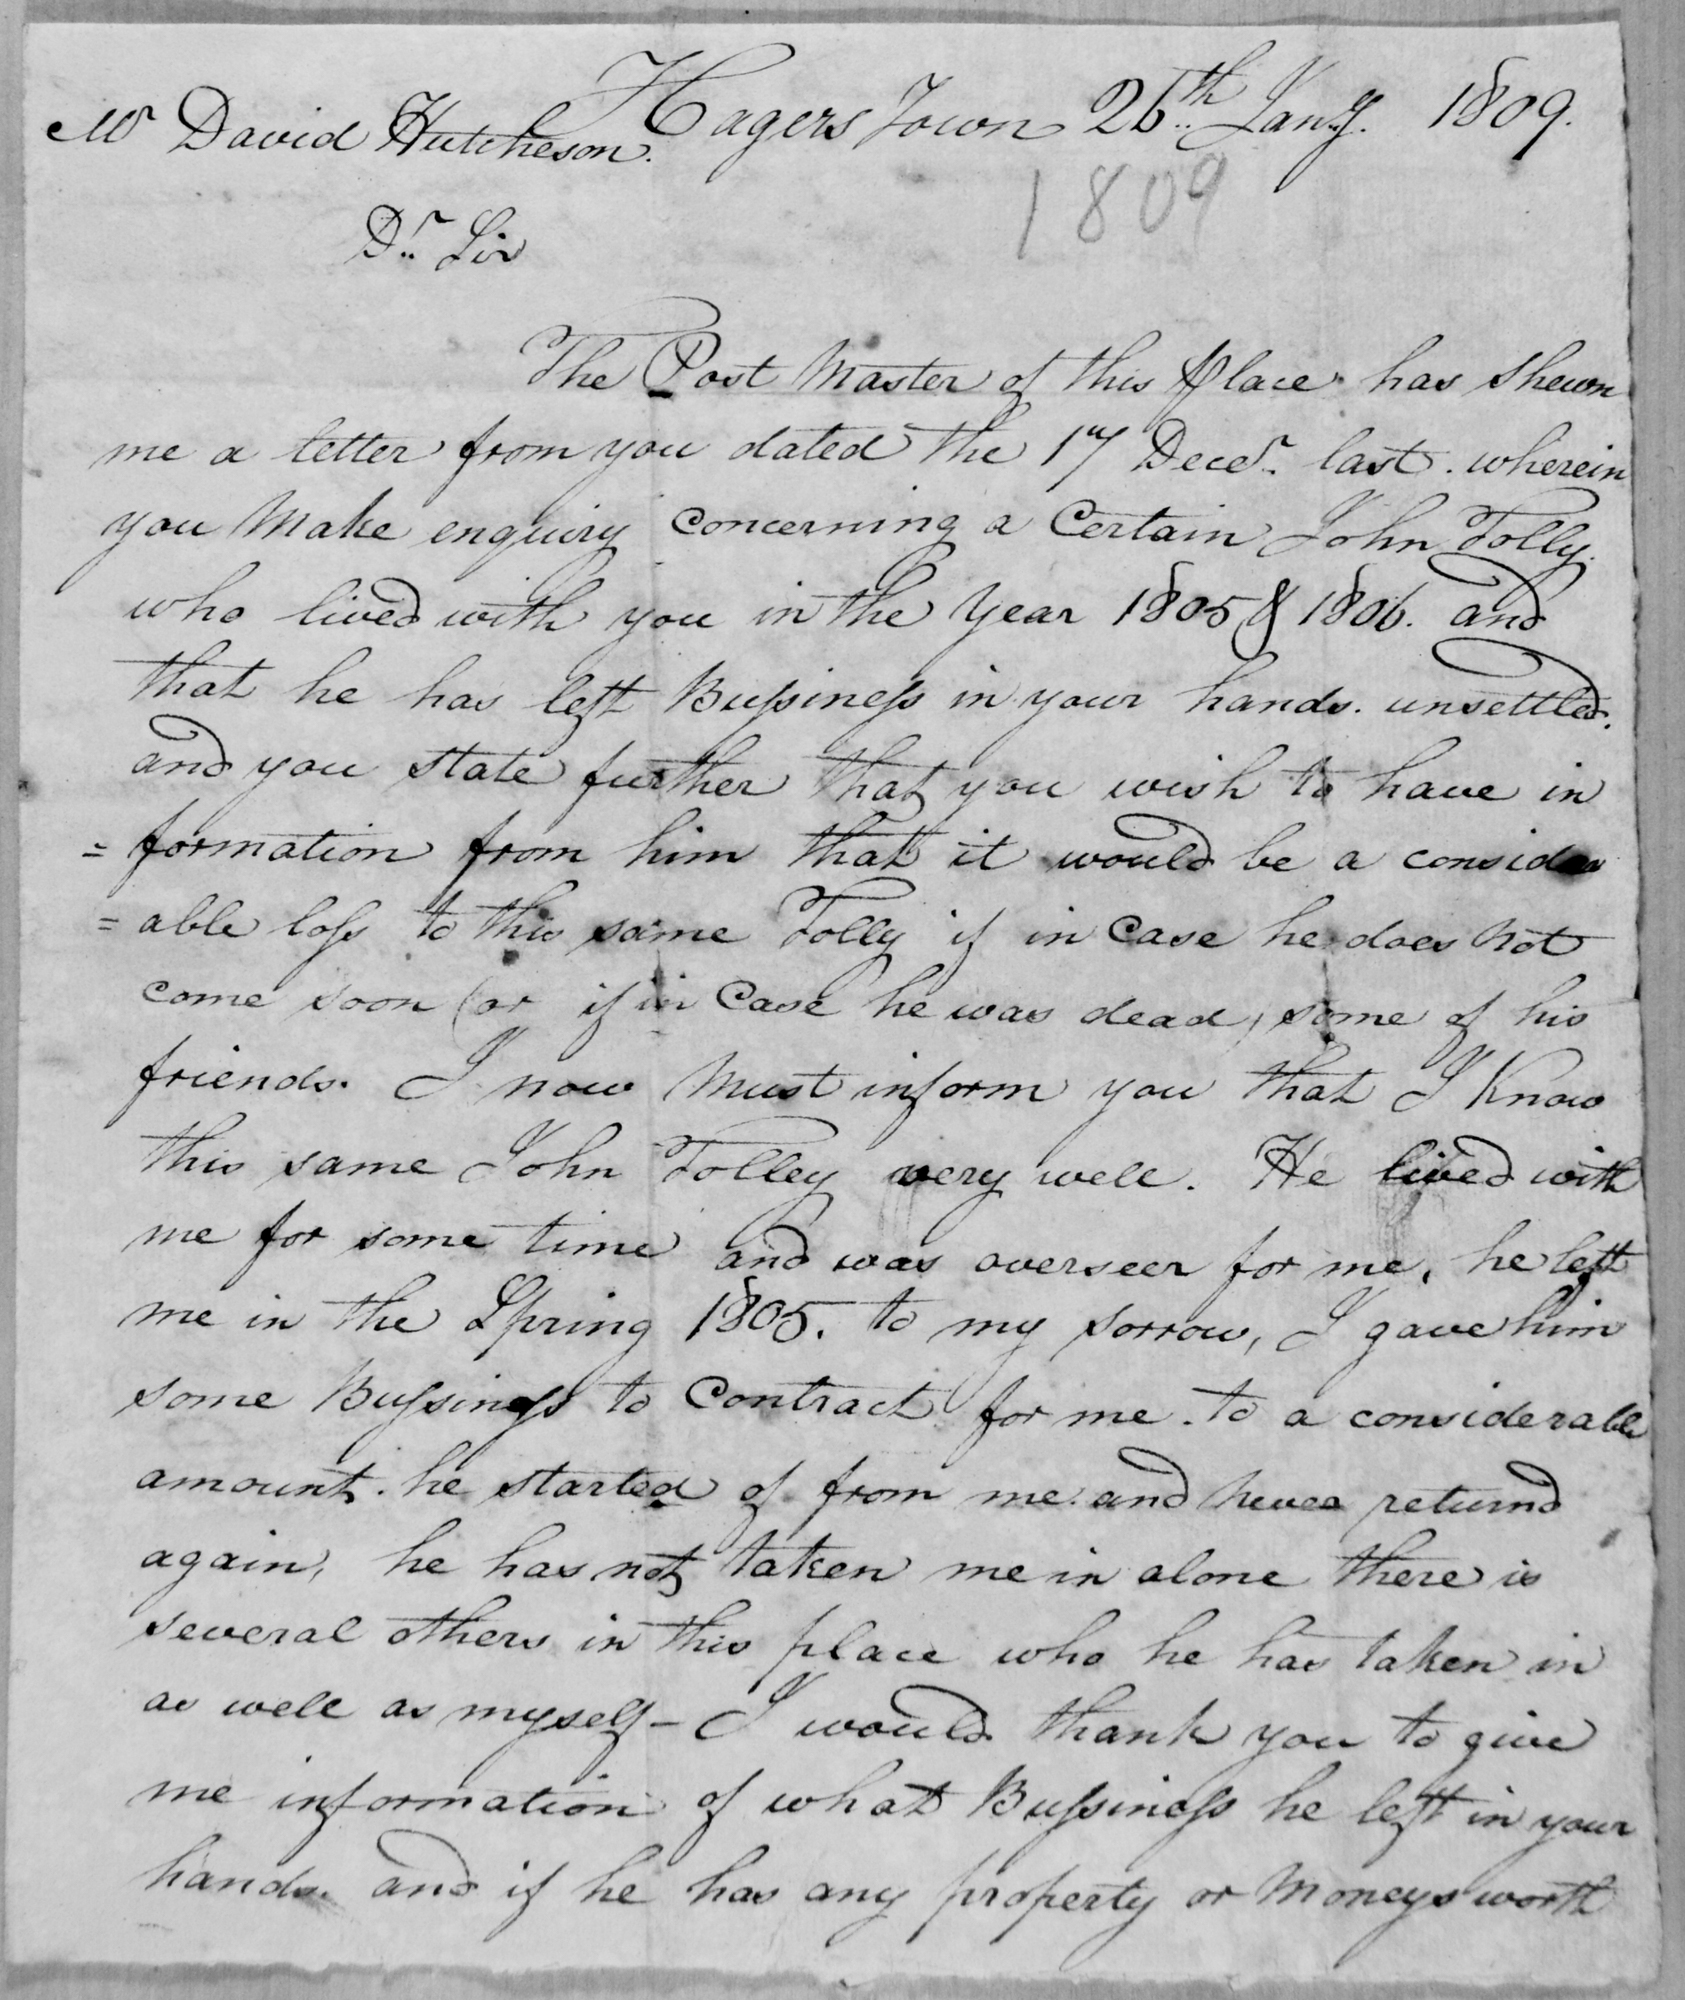 Letter from David Hutchison to Mr. Gilbert asking about the location of John Tolley, dated July 24, 1809.